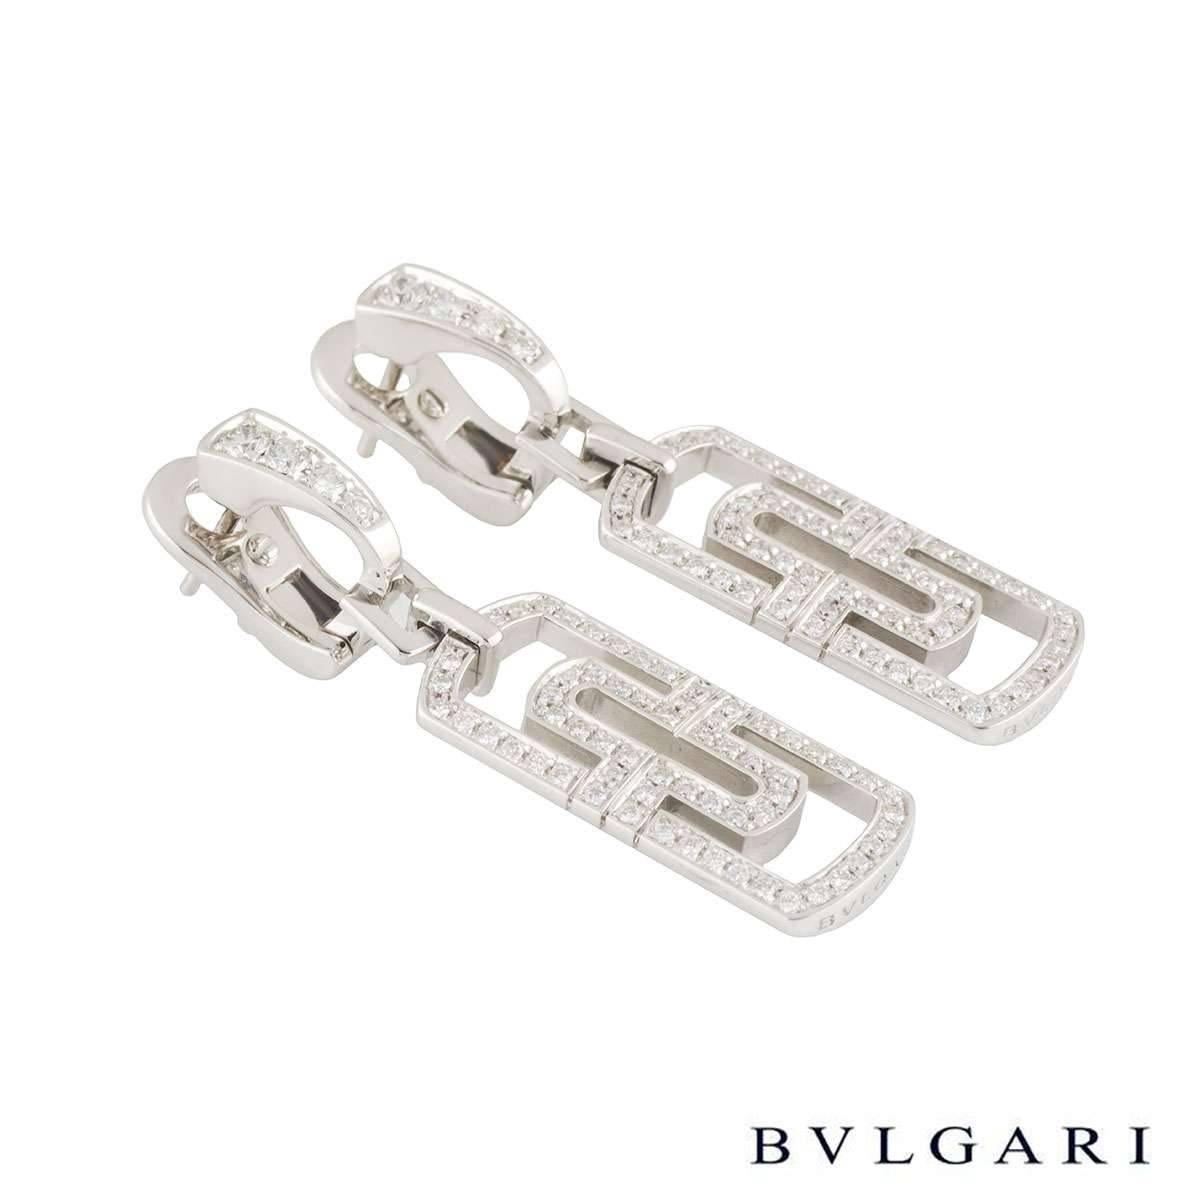 A pair of 18k white gold Bvlgari drop earrings from the Parentesi collection. The earrings comprise of the parentesi motif with 132 round brilliant cut diamonds totalling approximately 1.14ct, G colour and VS clarity. The earrings feature a post and